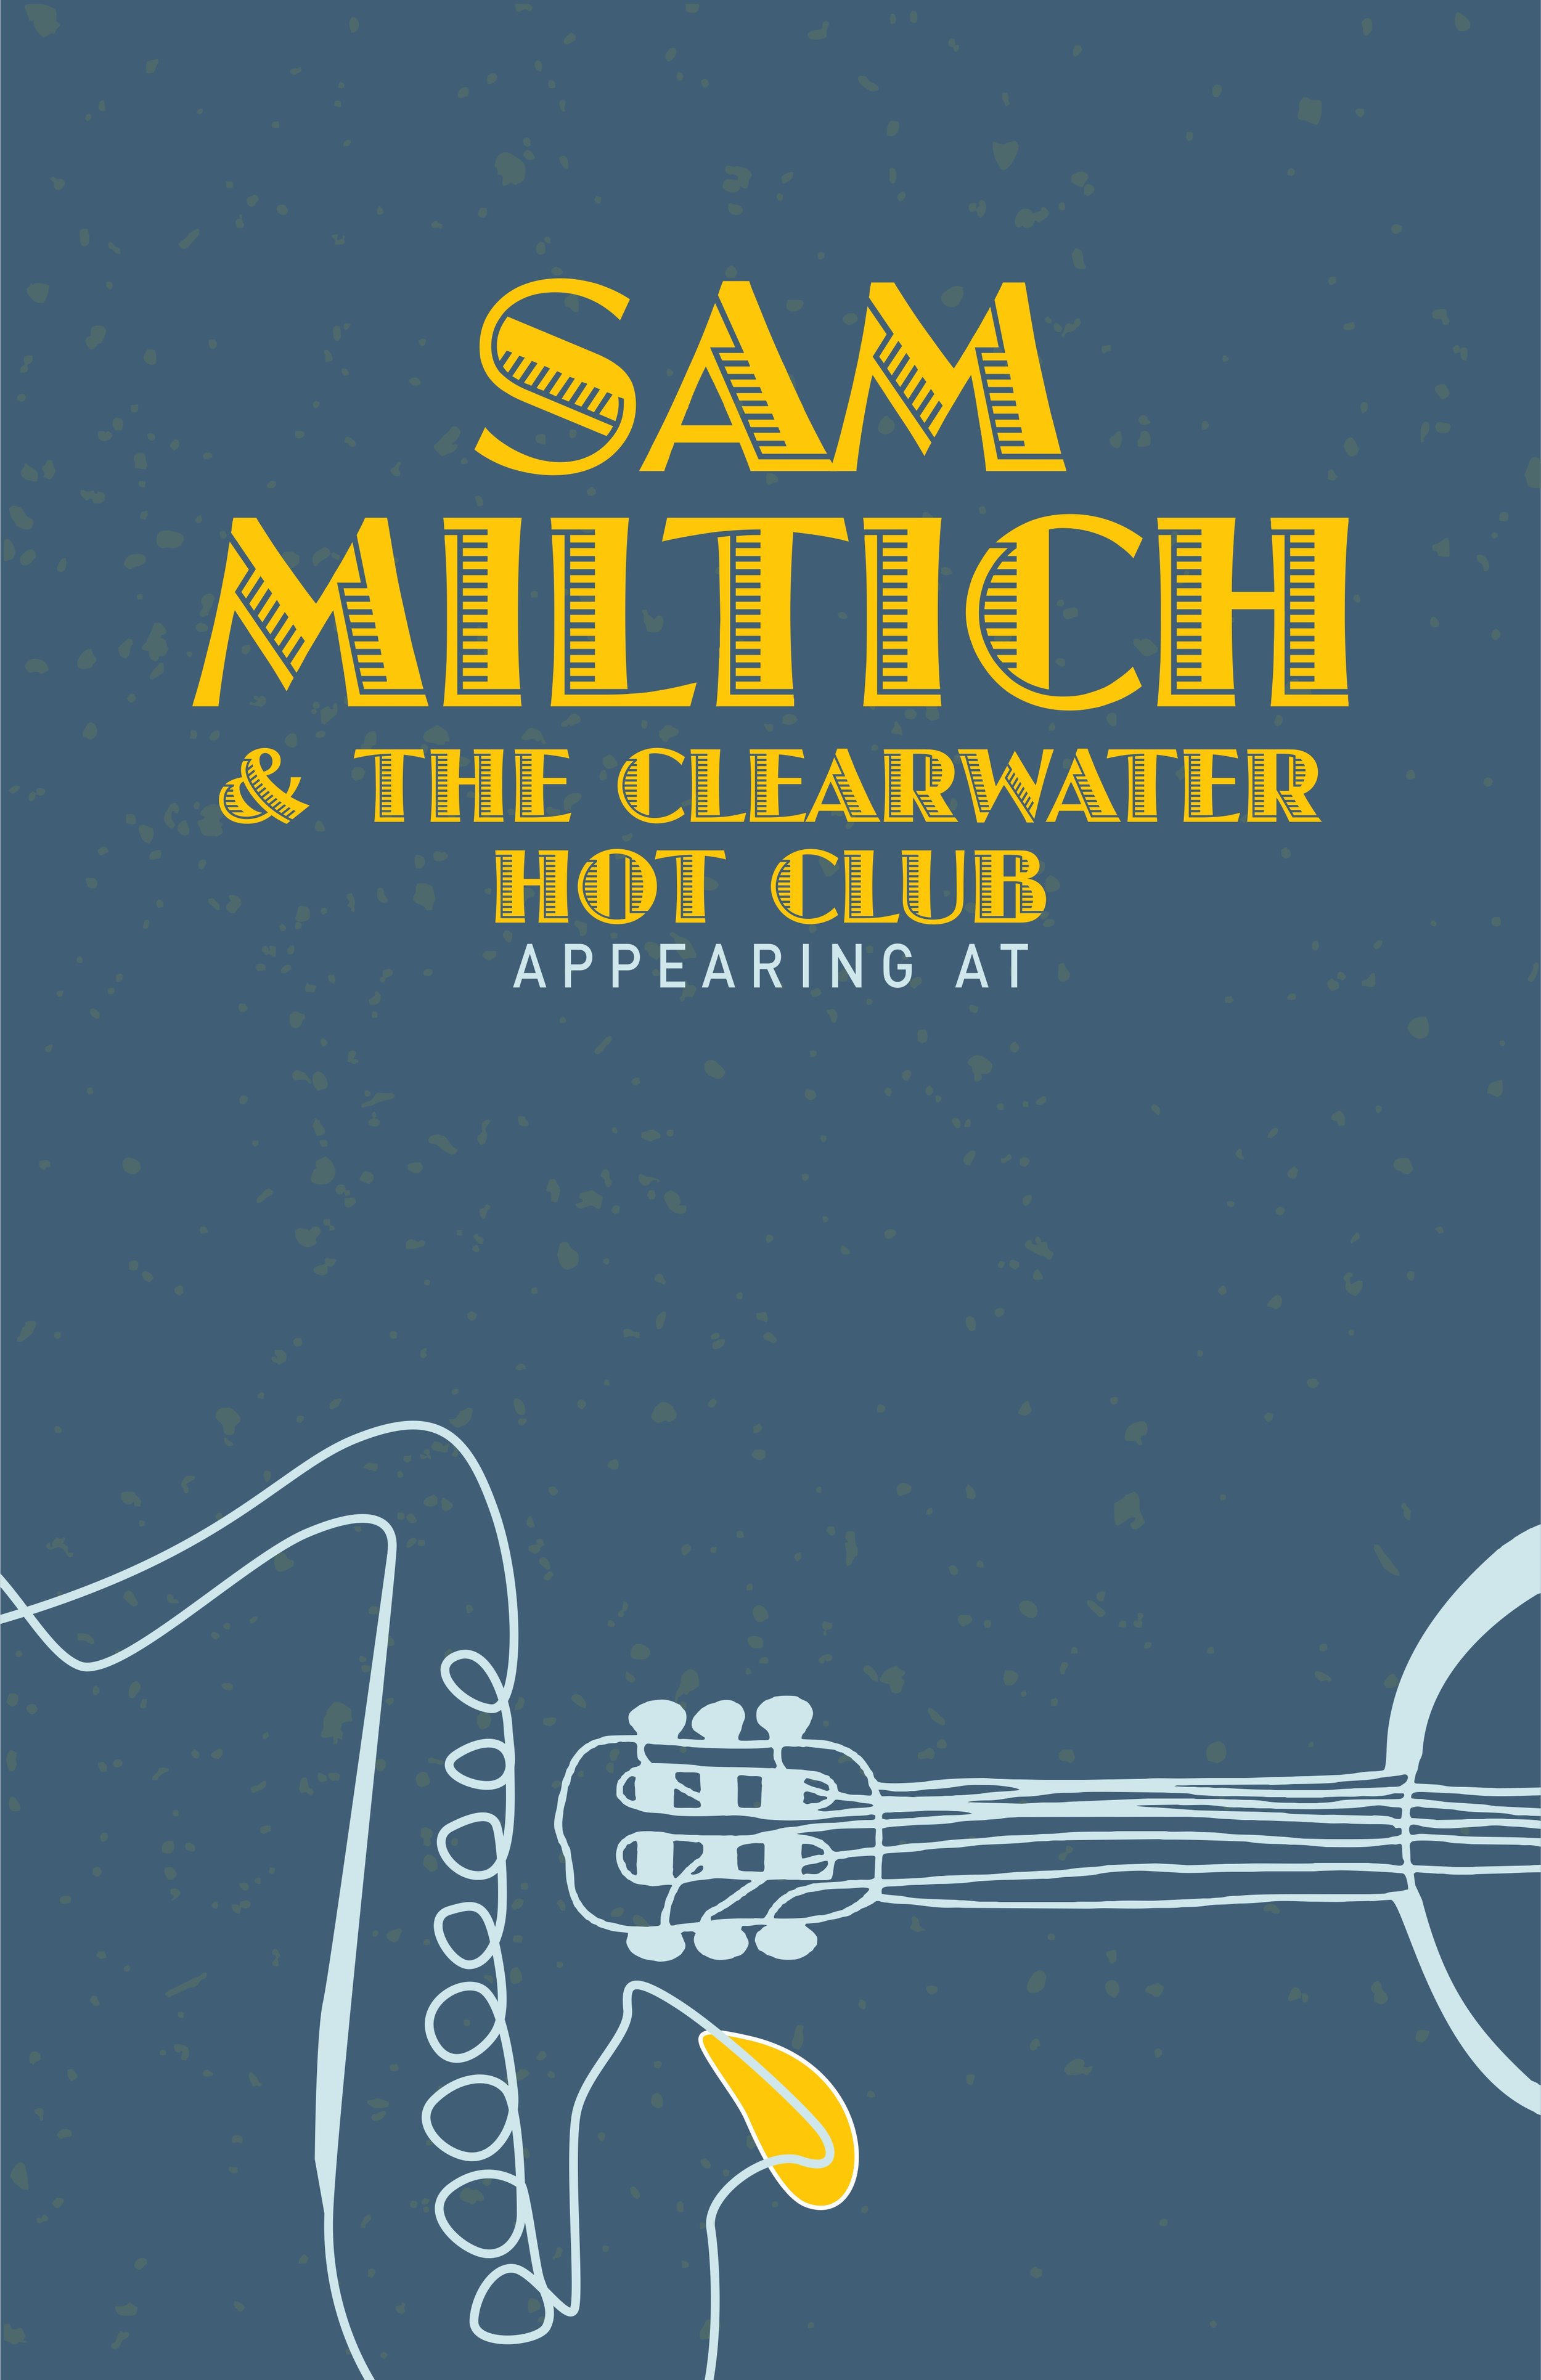 miltich and the clearwater hot club.jpg